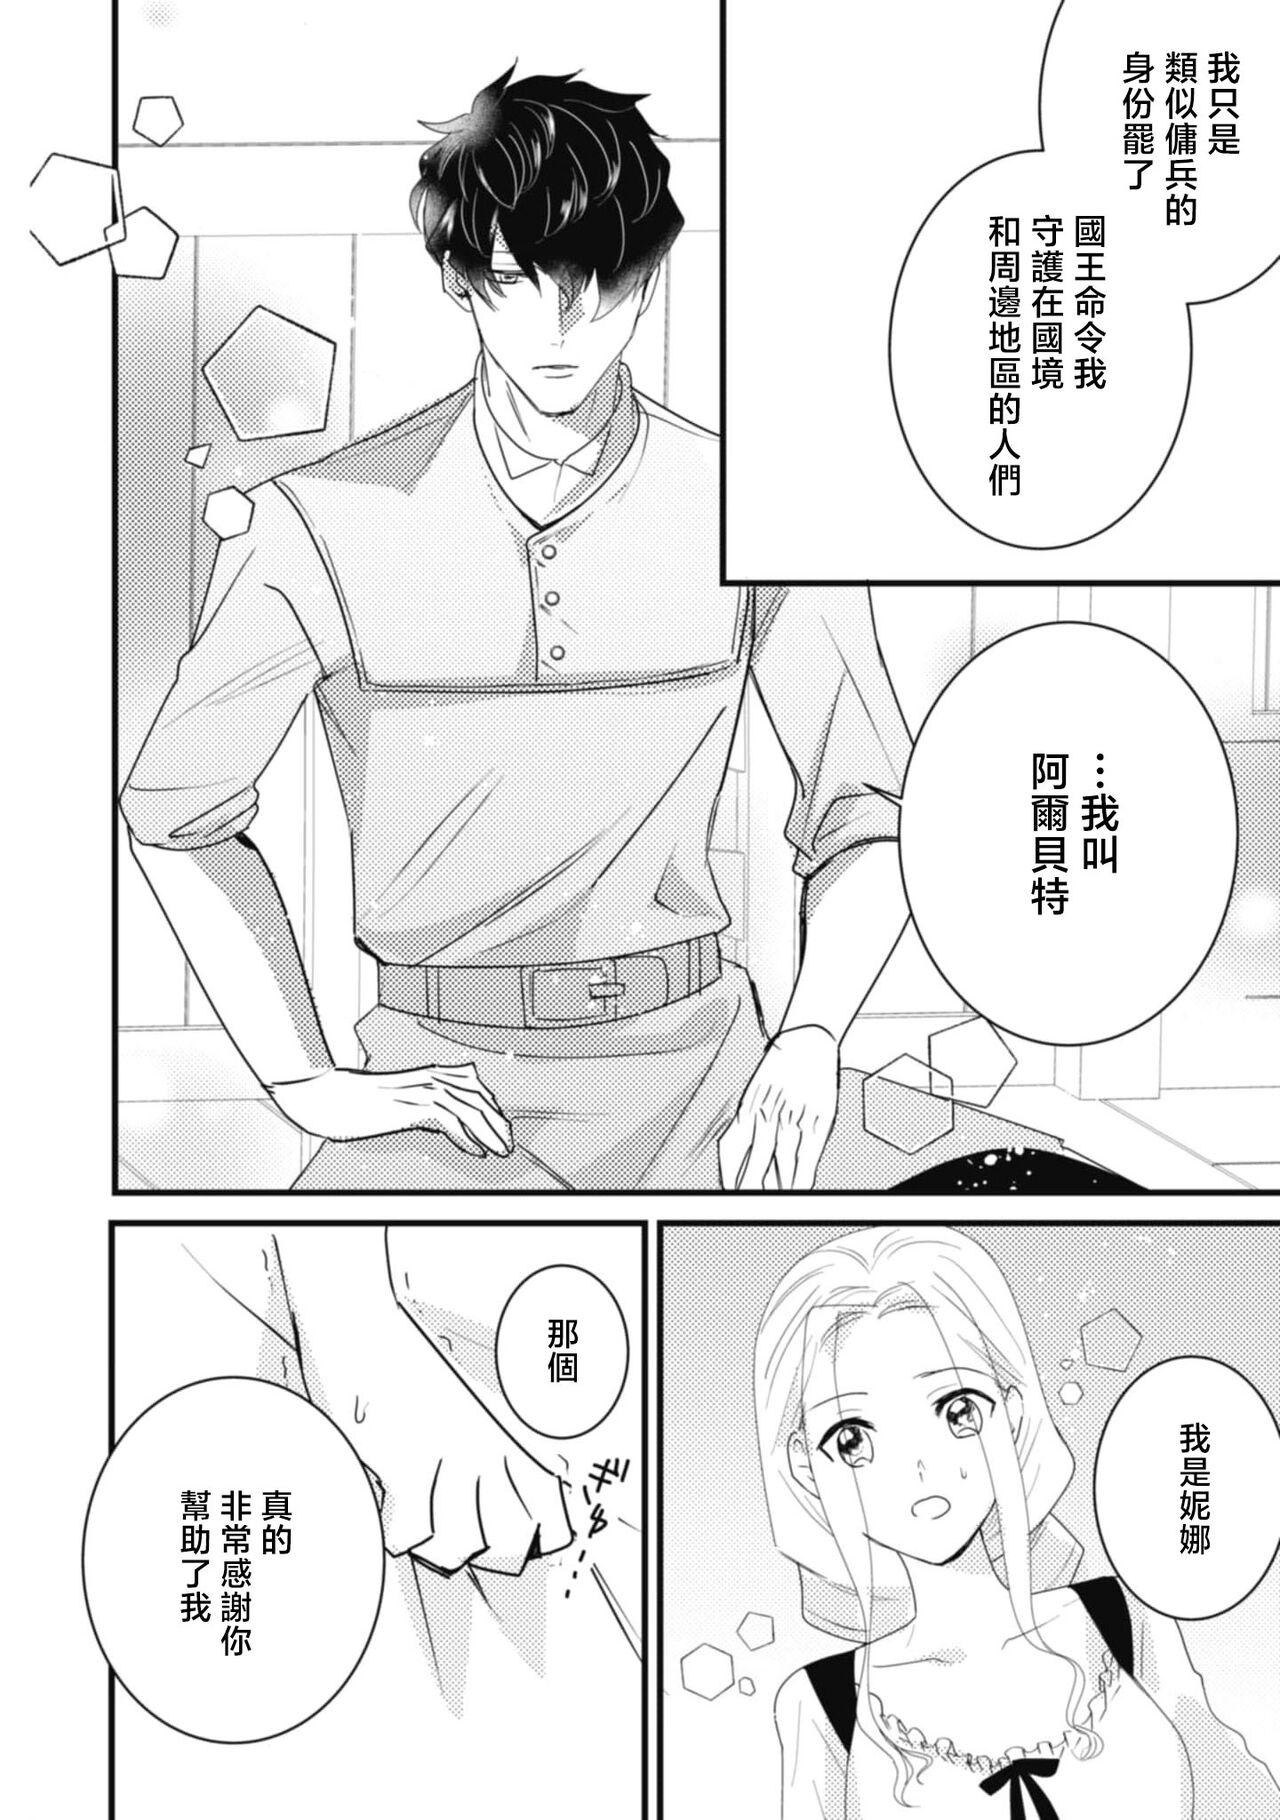 A shepherd in love with a demoted knight | 与被贬骑士相爱的牧羊女1 19